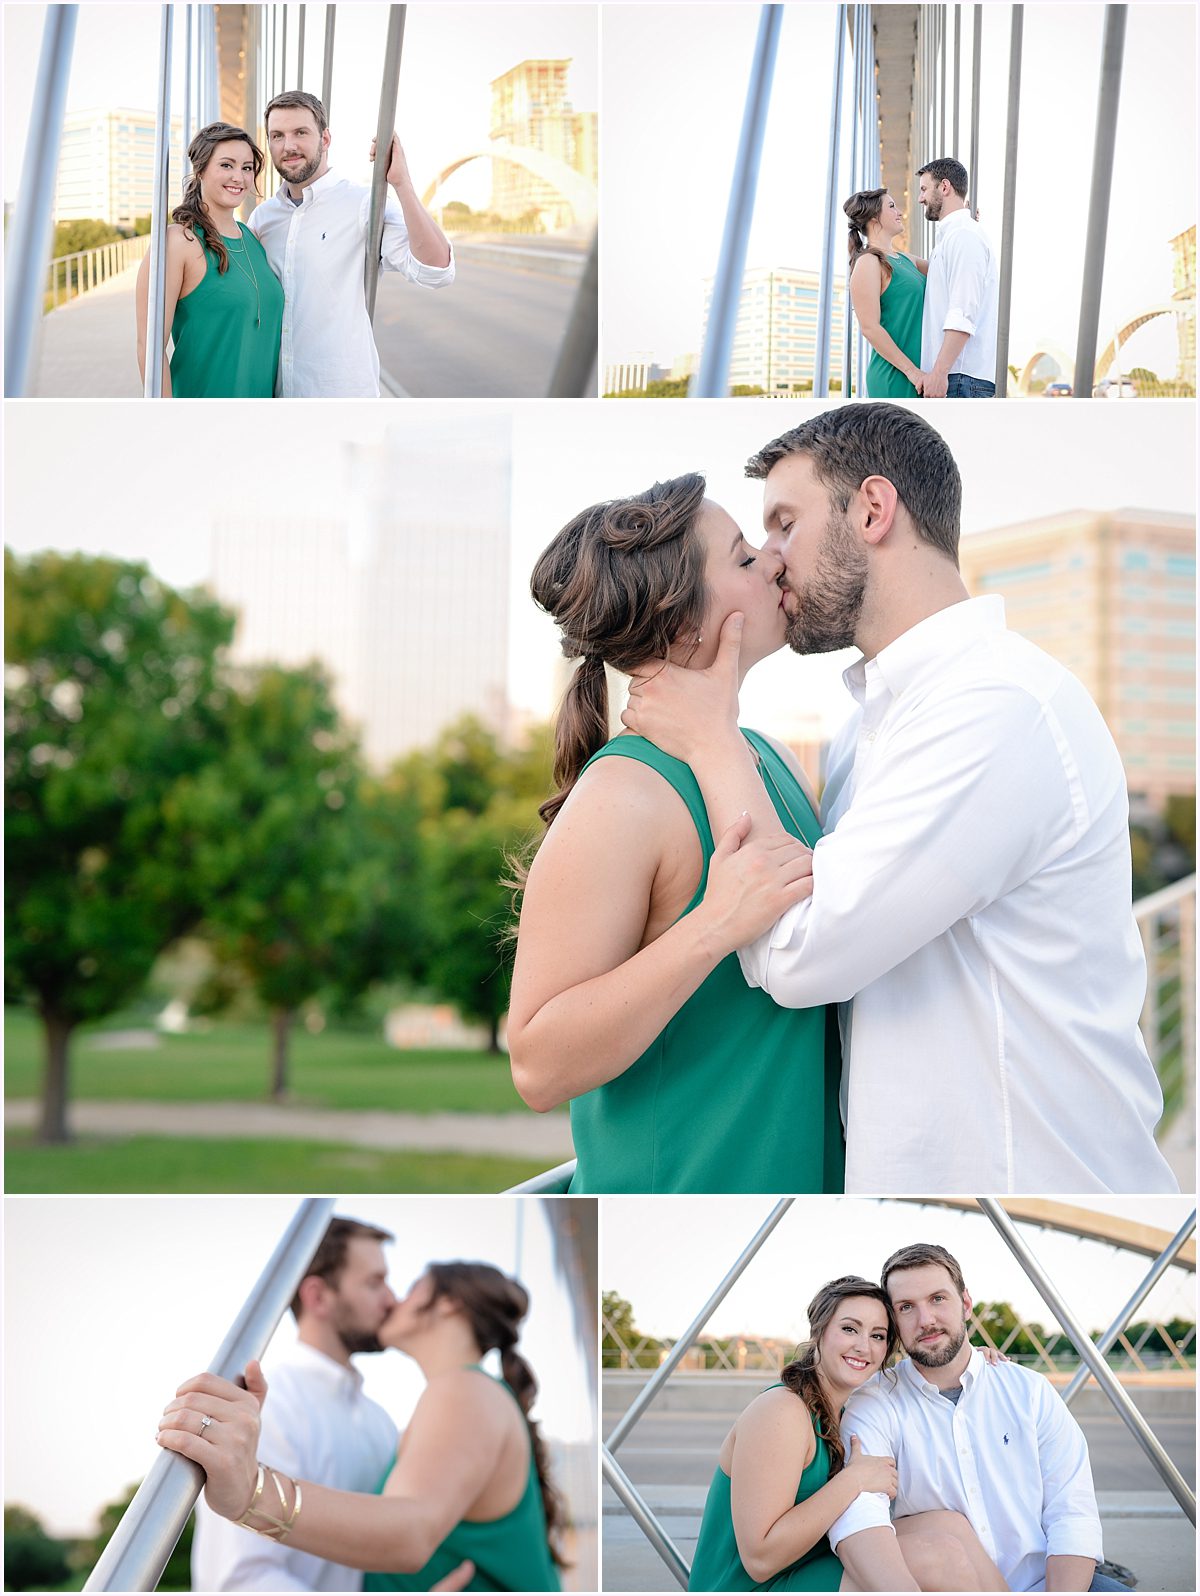 Engagement session photos in Fort Worth at Trinity Park and West 7th Bridge